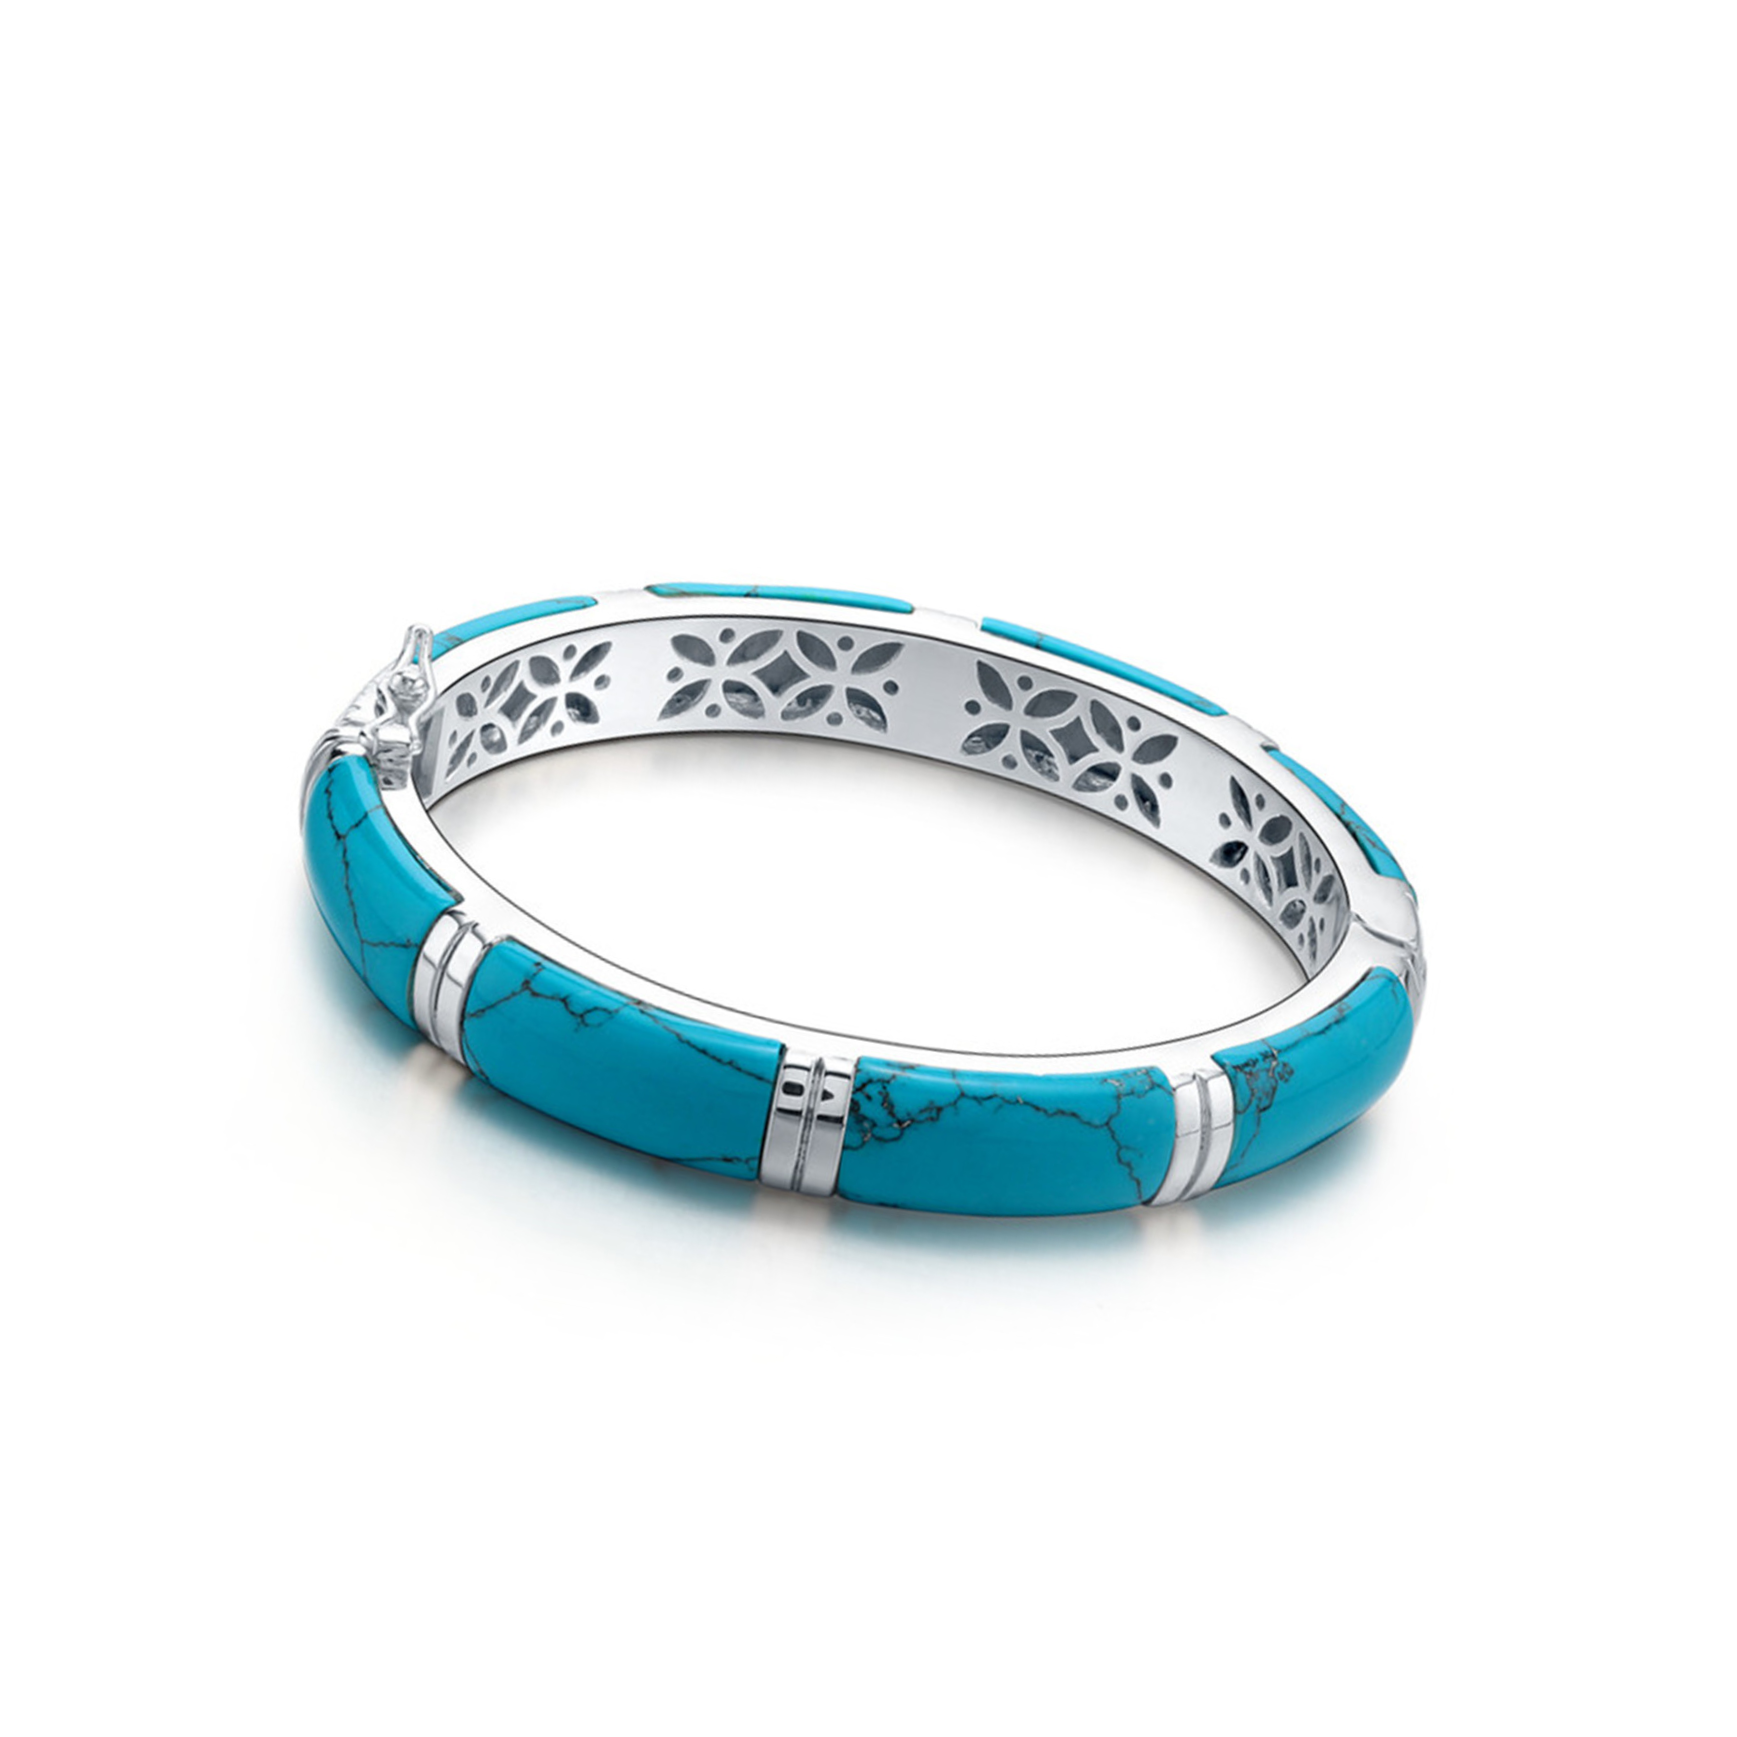 Popular bracelet 925 sterling silver high quality stitching turquoise texture gift ladies jewelry charm bracelet